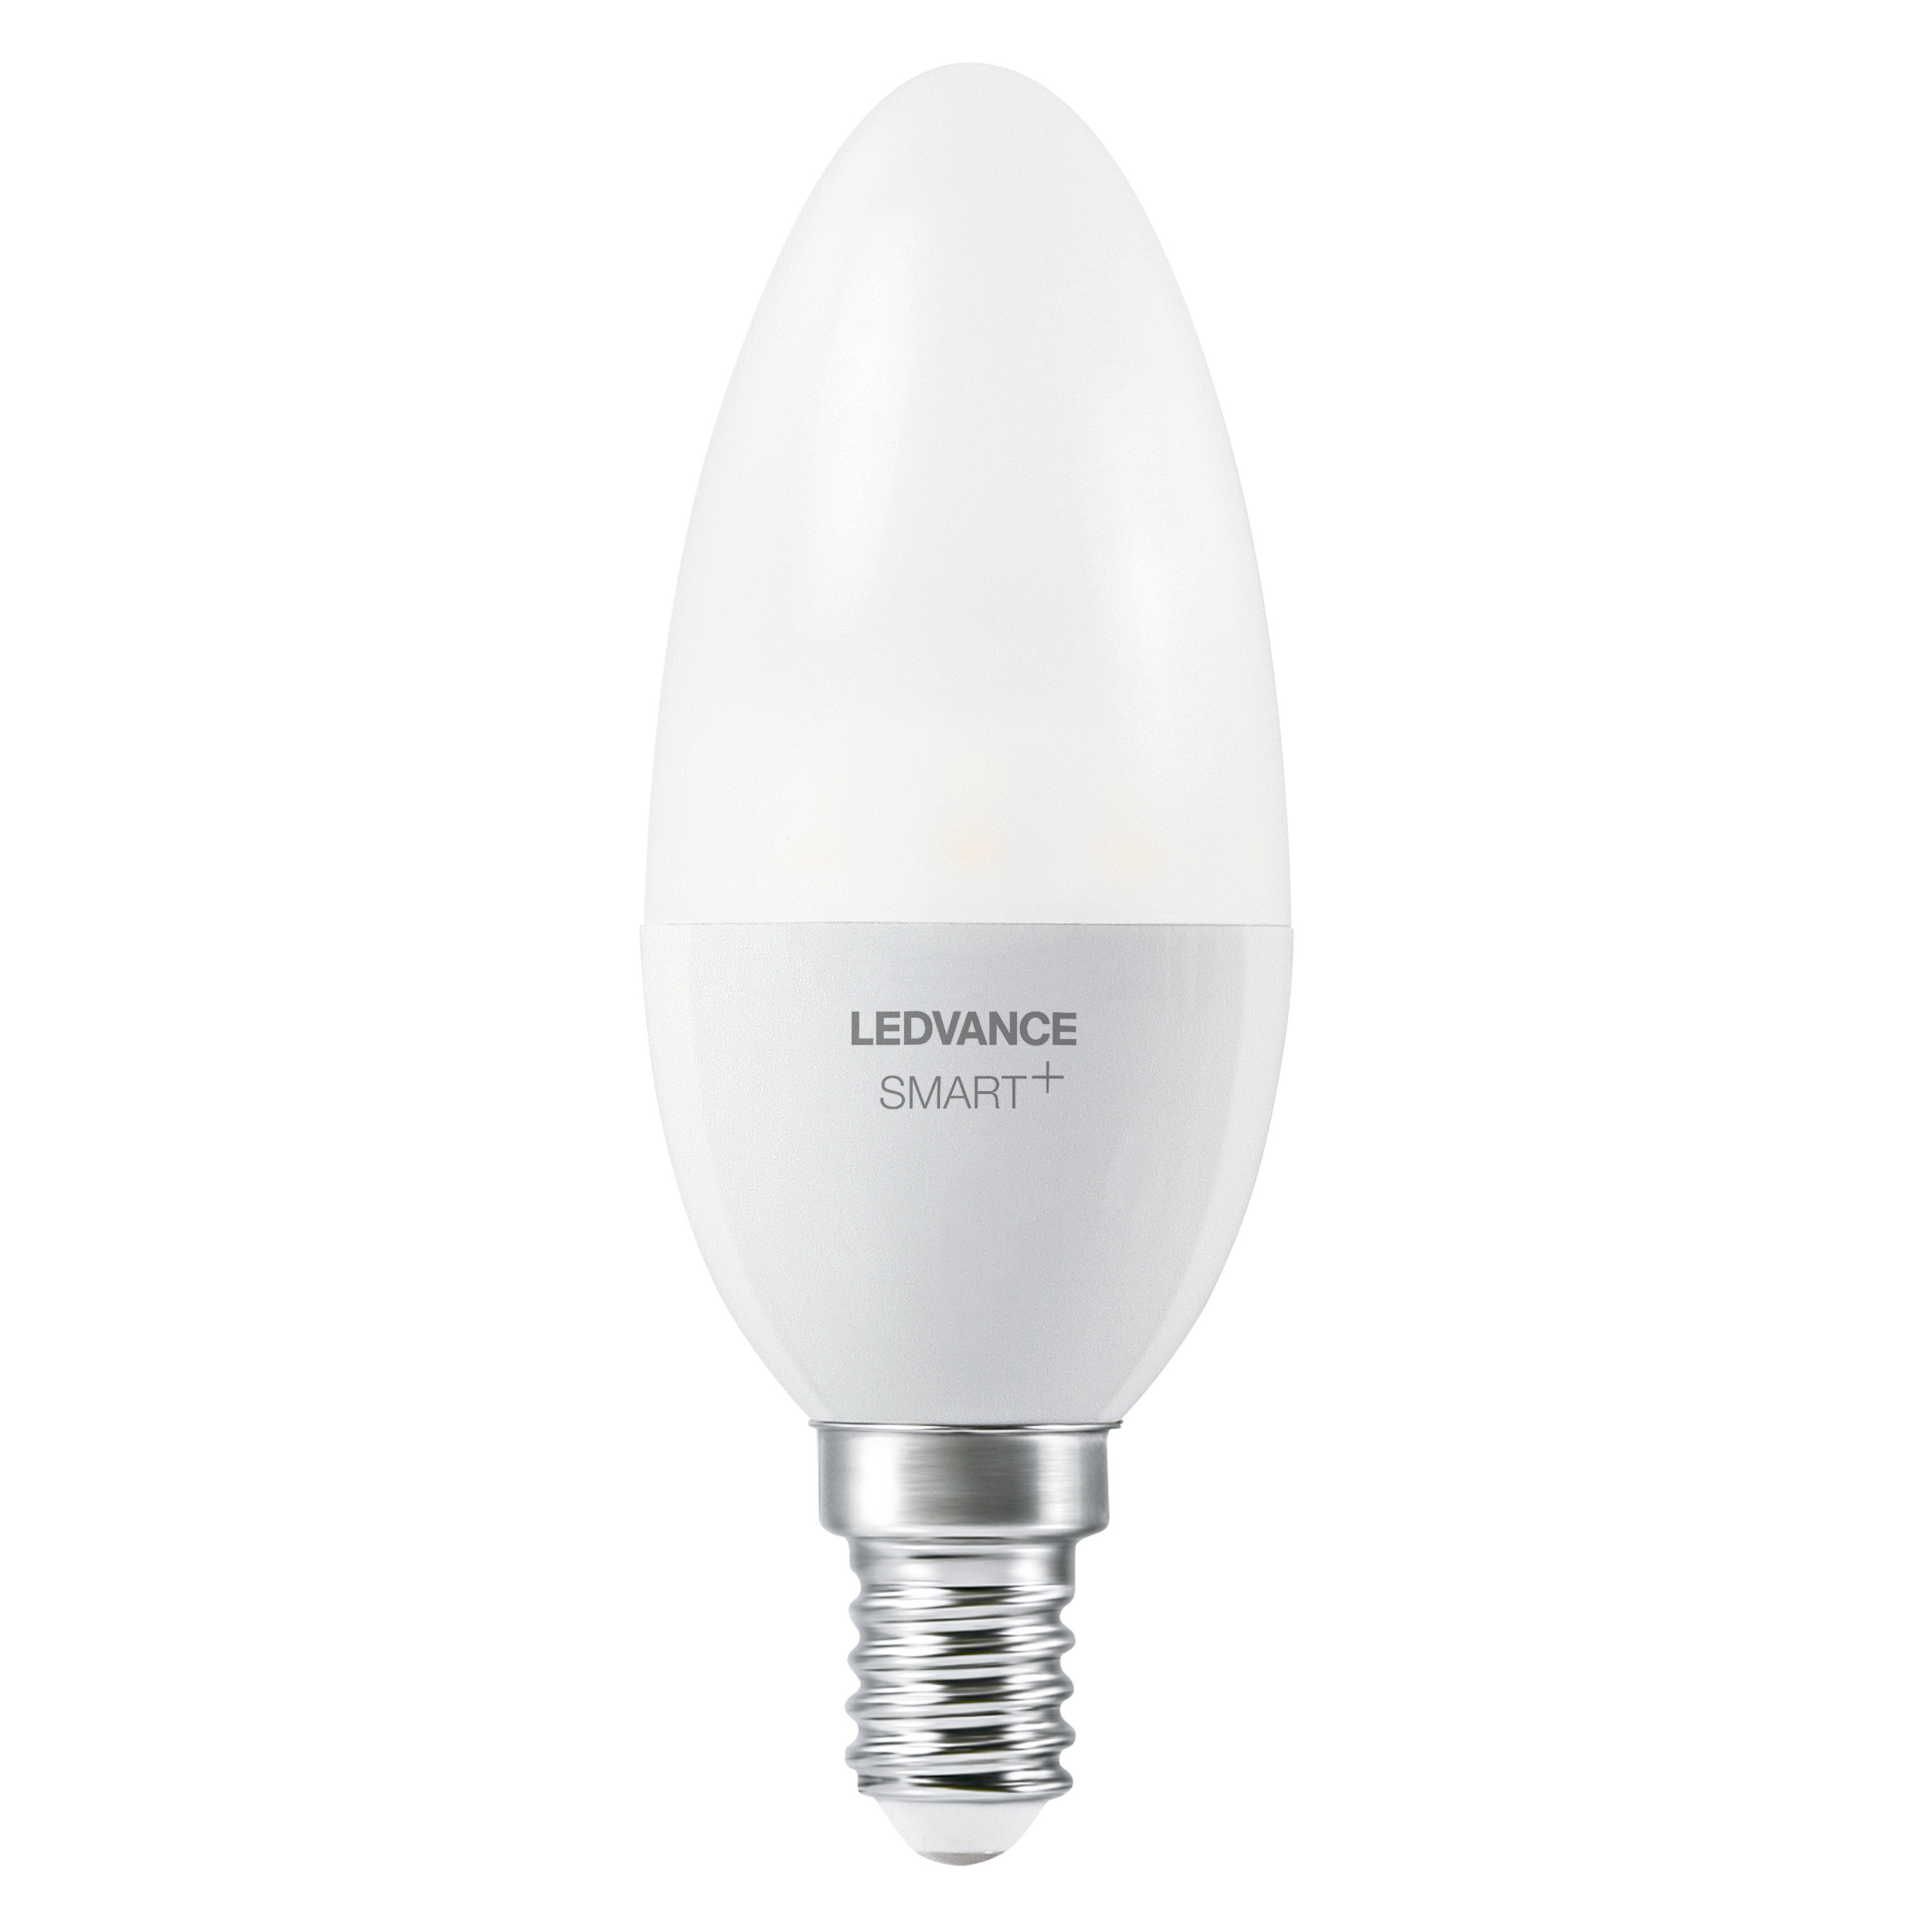 Ledvance SMART+ Candle Dimmable